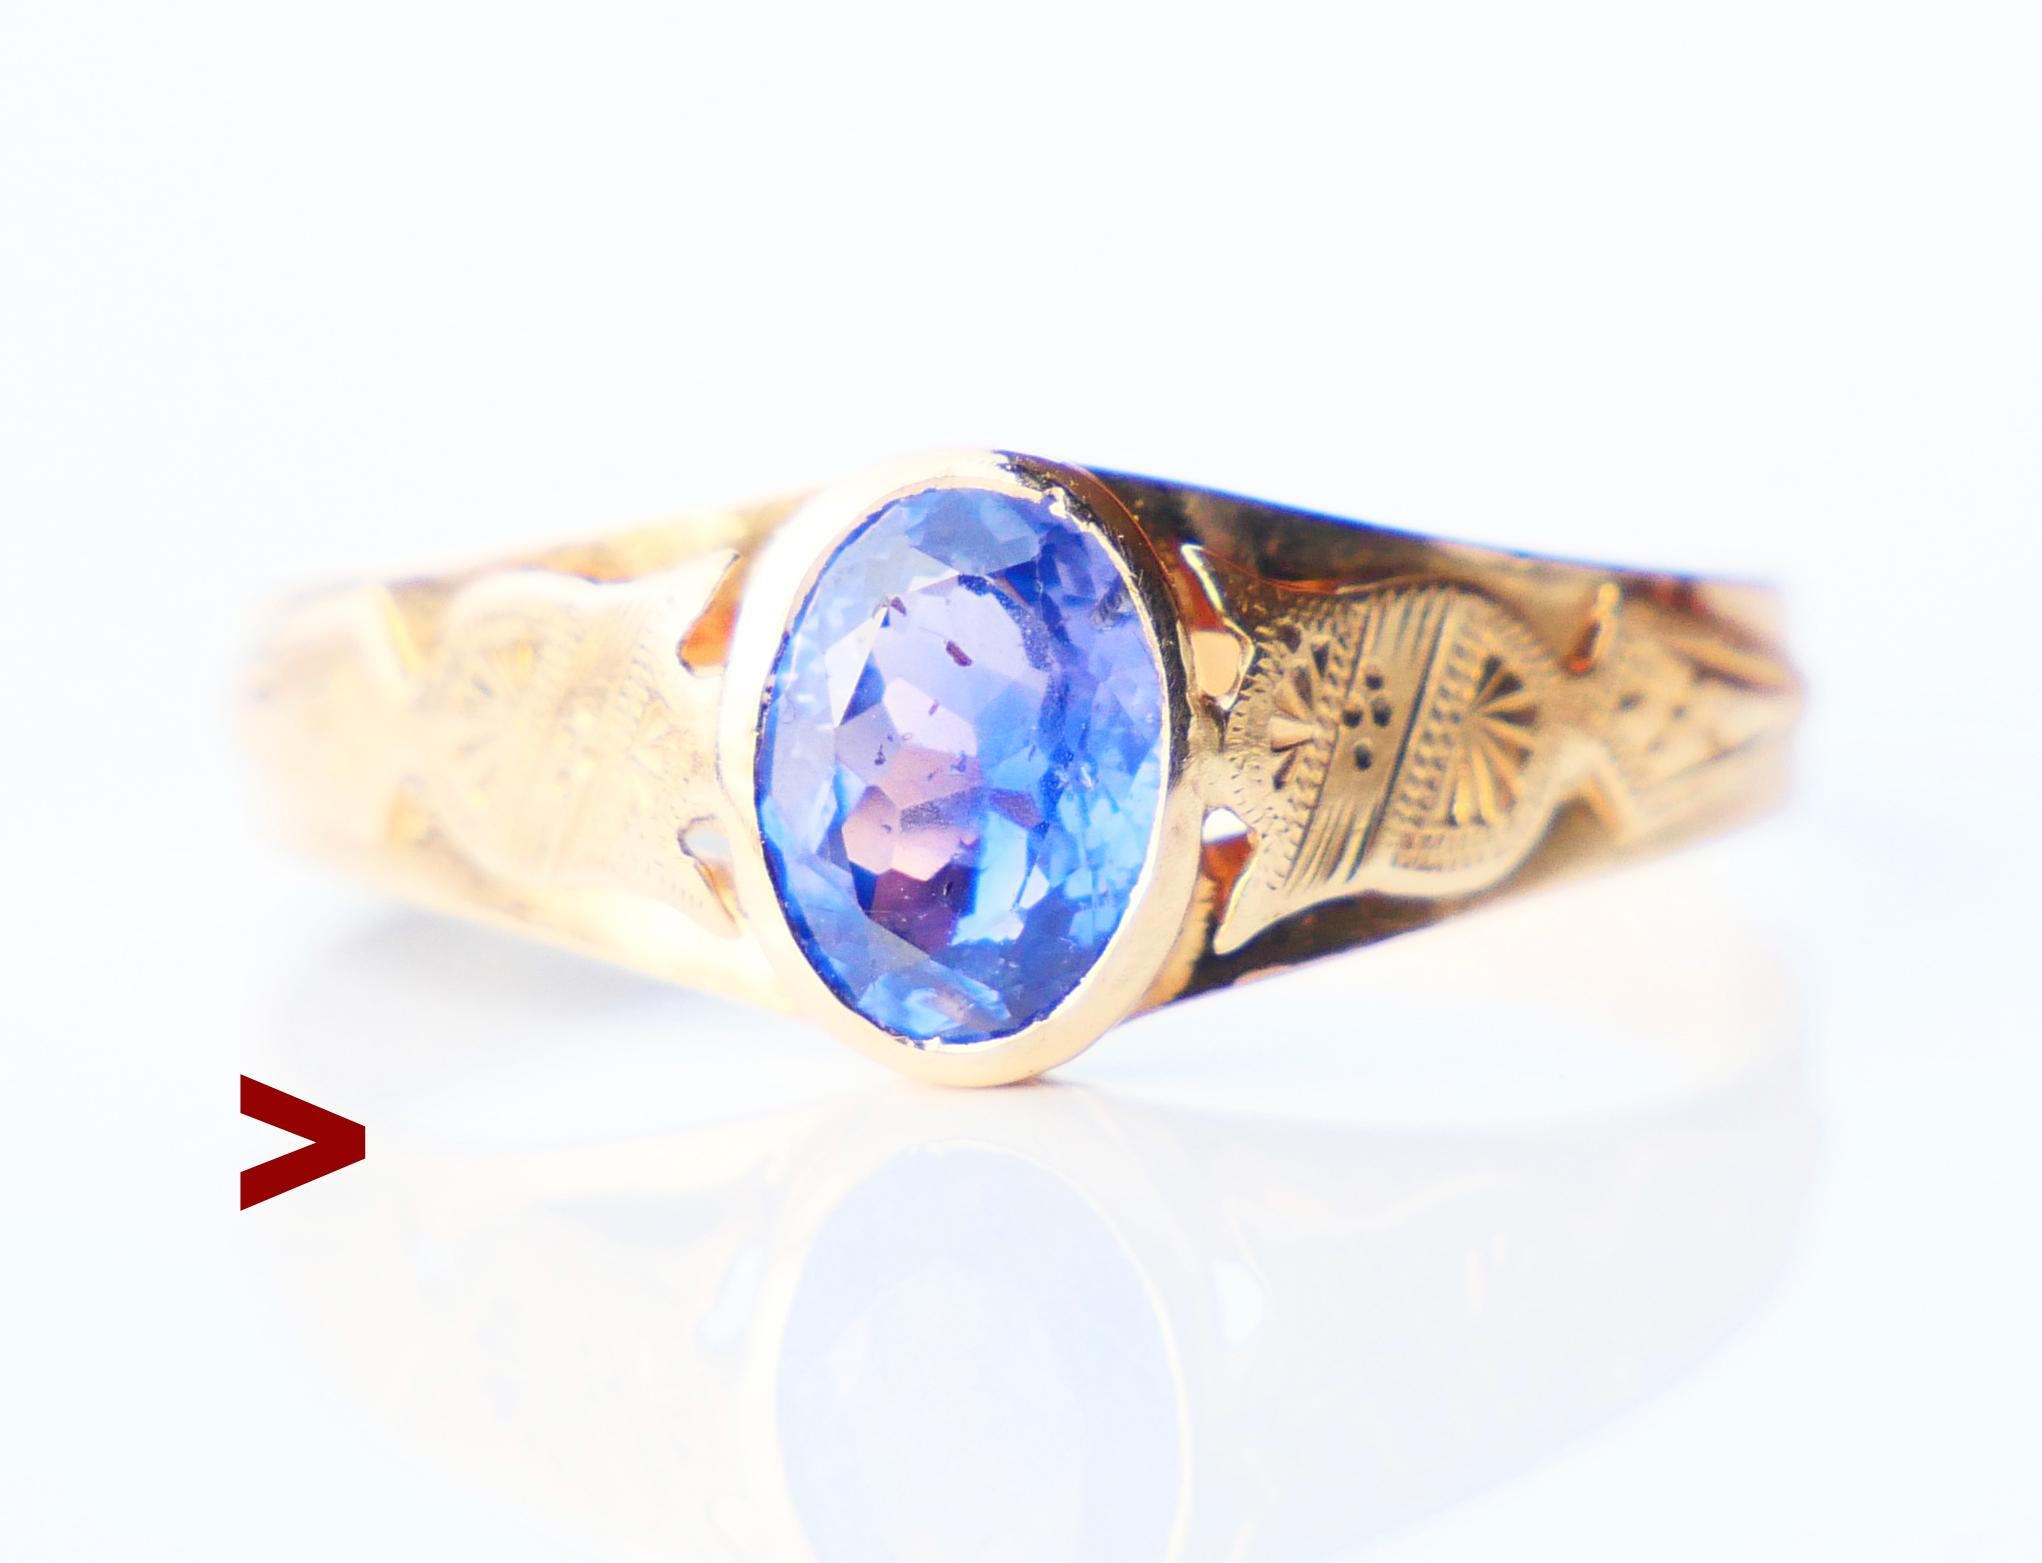 A Ring from the distant Art- -Deco period, the band in solid 18K Yellow Gold with a bezel set oval cut natural Bi -colored Light- Blue / Purple Sapphire 7 mm x 5 mm x 3mm deep/ ca. 1 ct. This stone has peculiar inclusions and color zoning. In